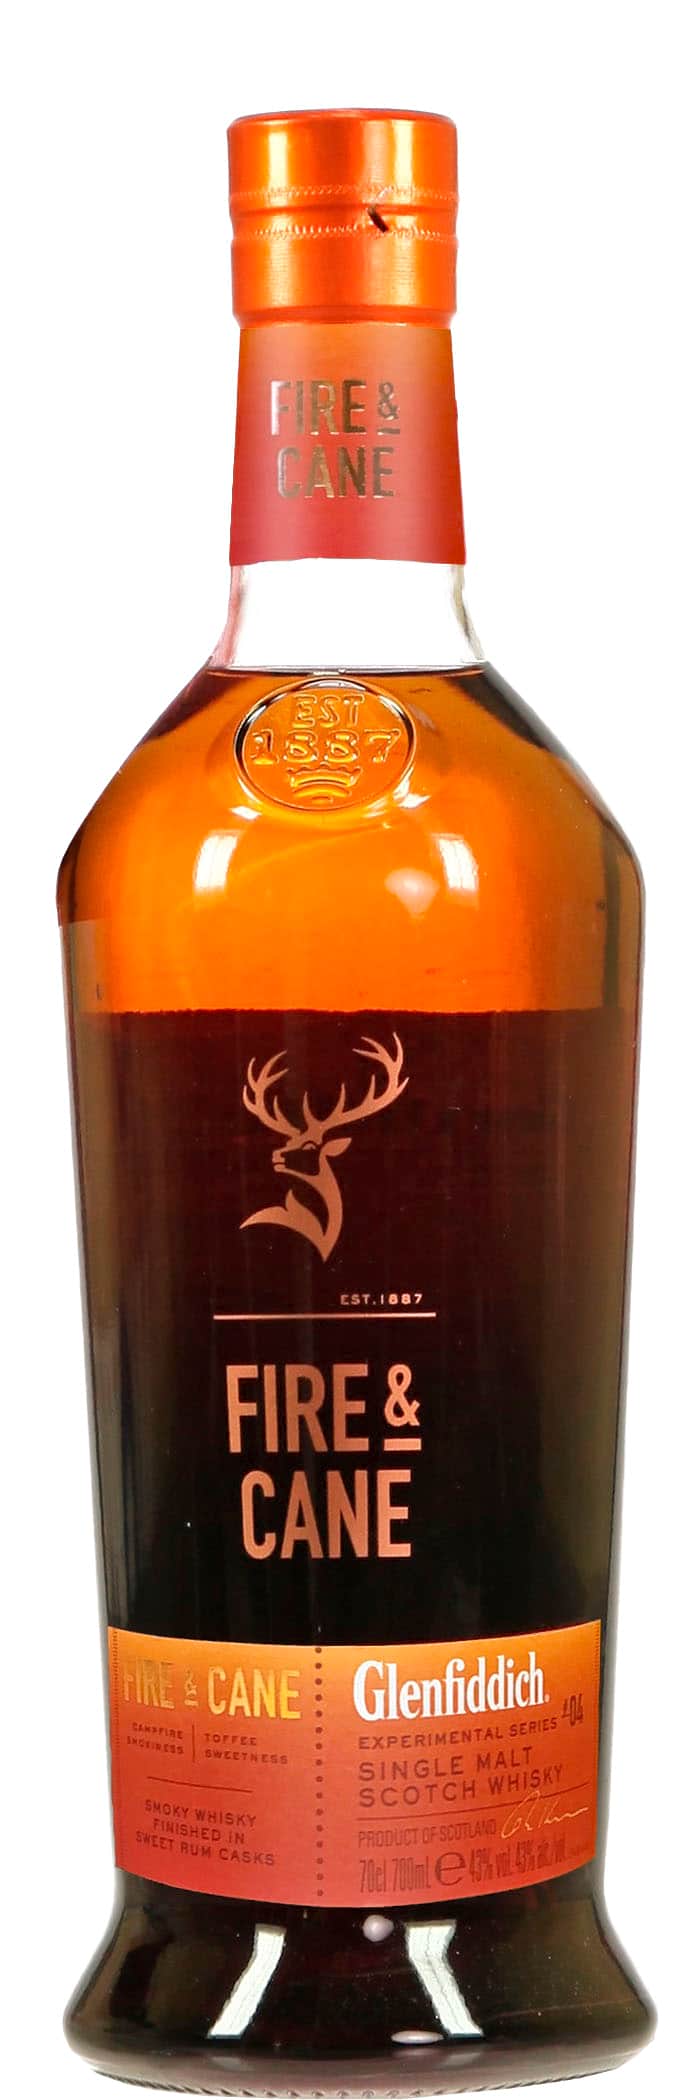 Glenfiddich Fire and Cane Experiment фото